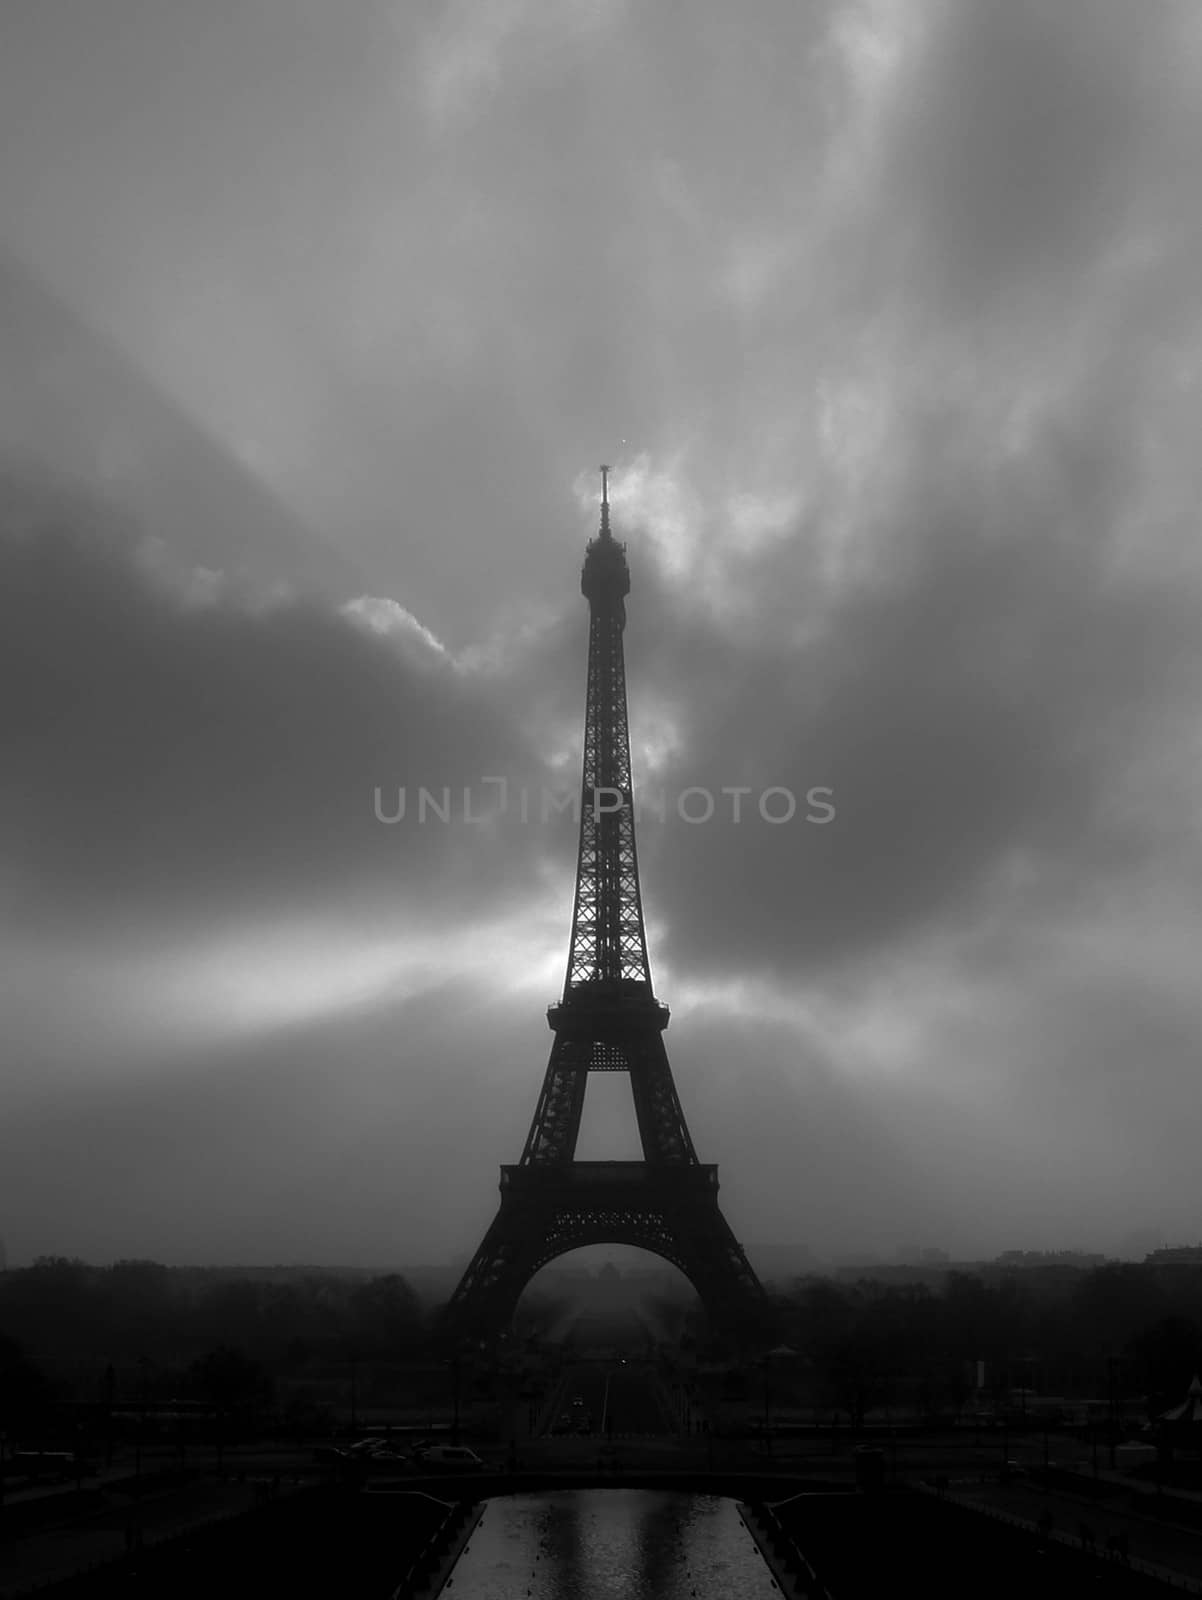 Picture of the Eiffel Tower on a cloudy day.